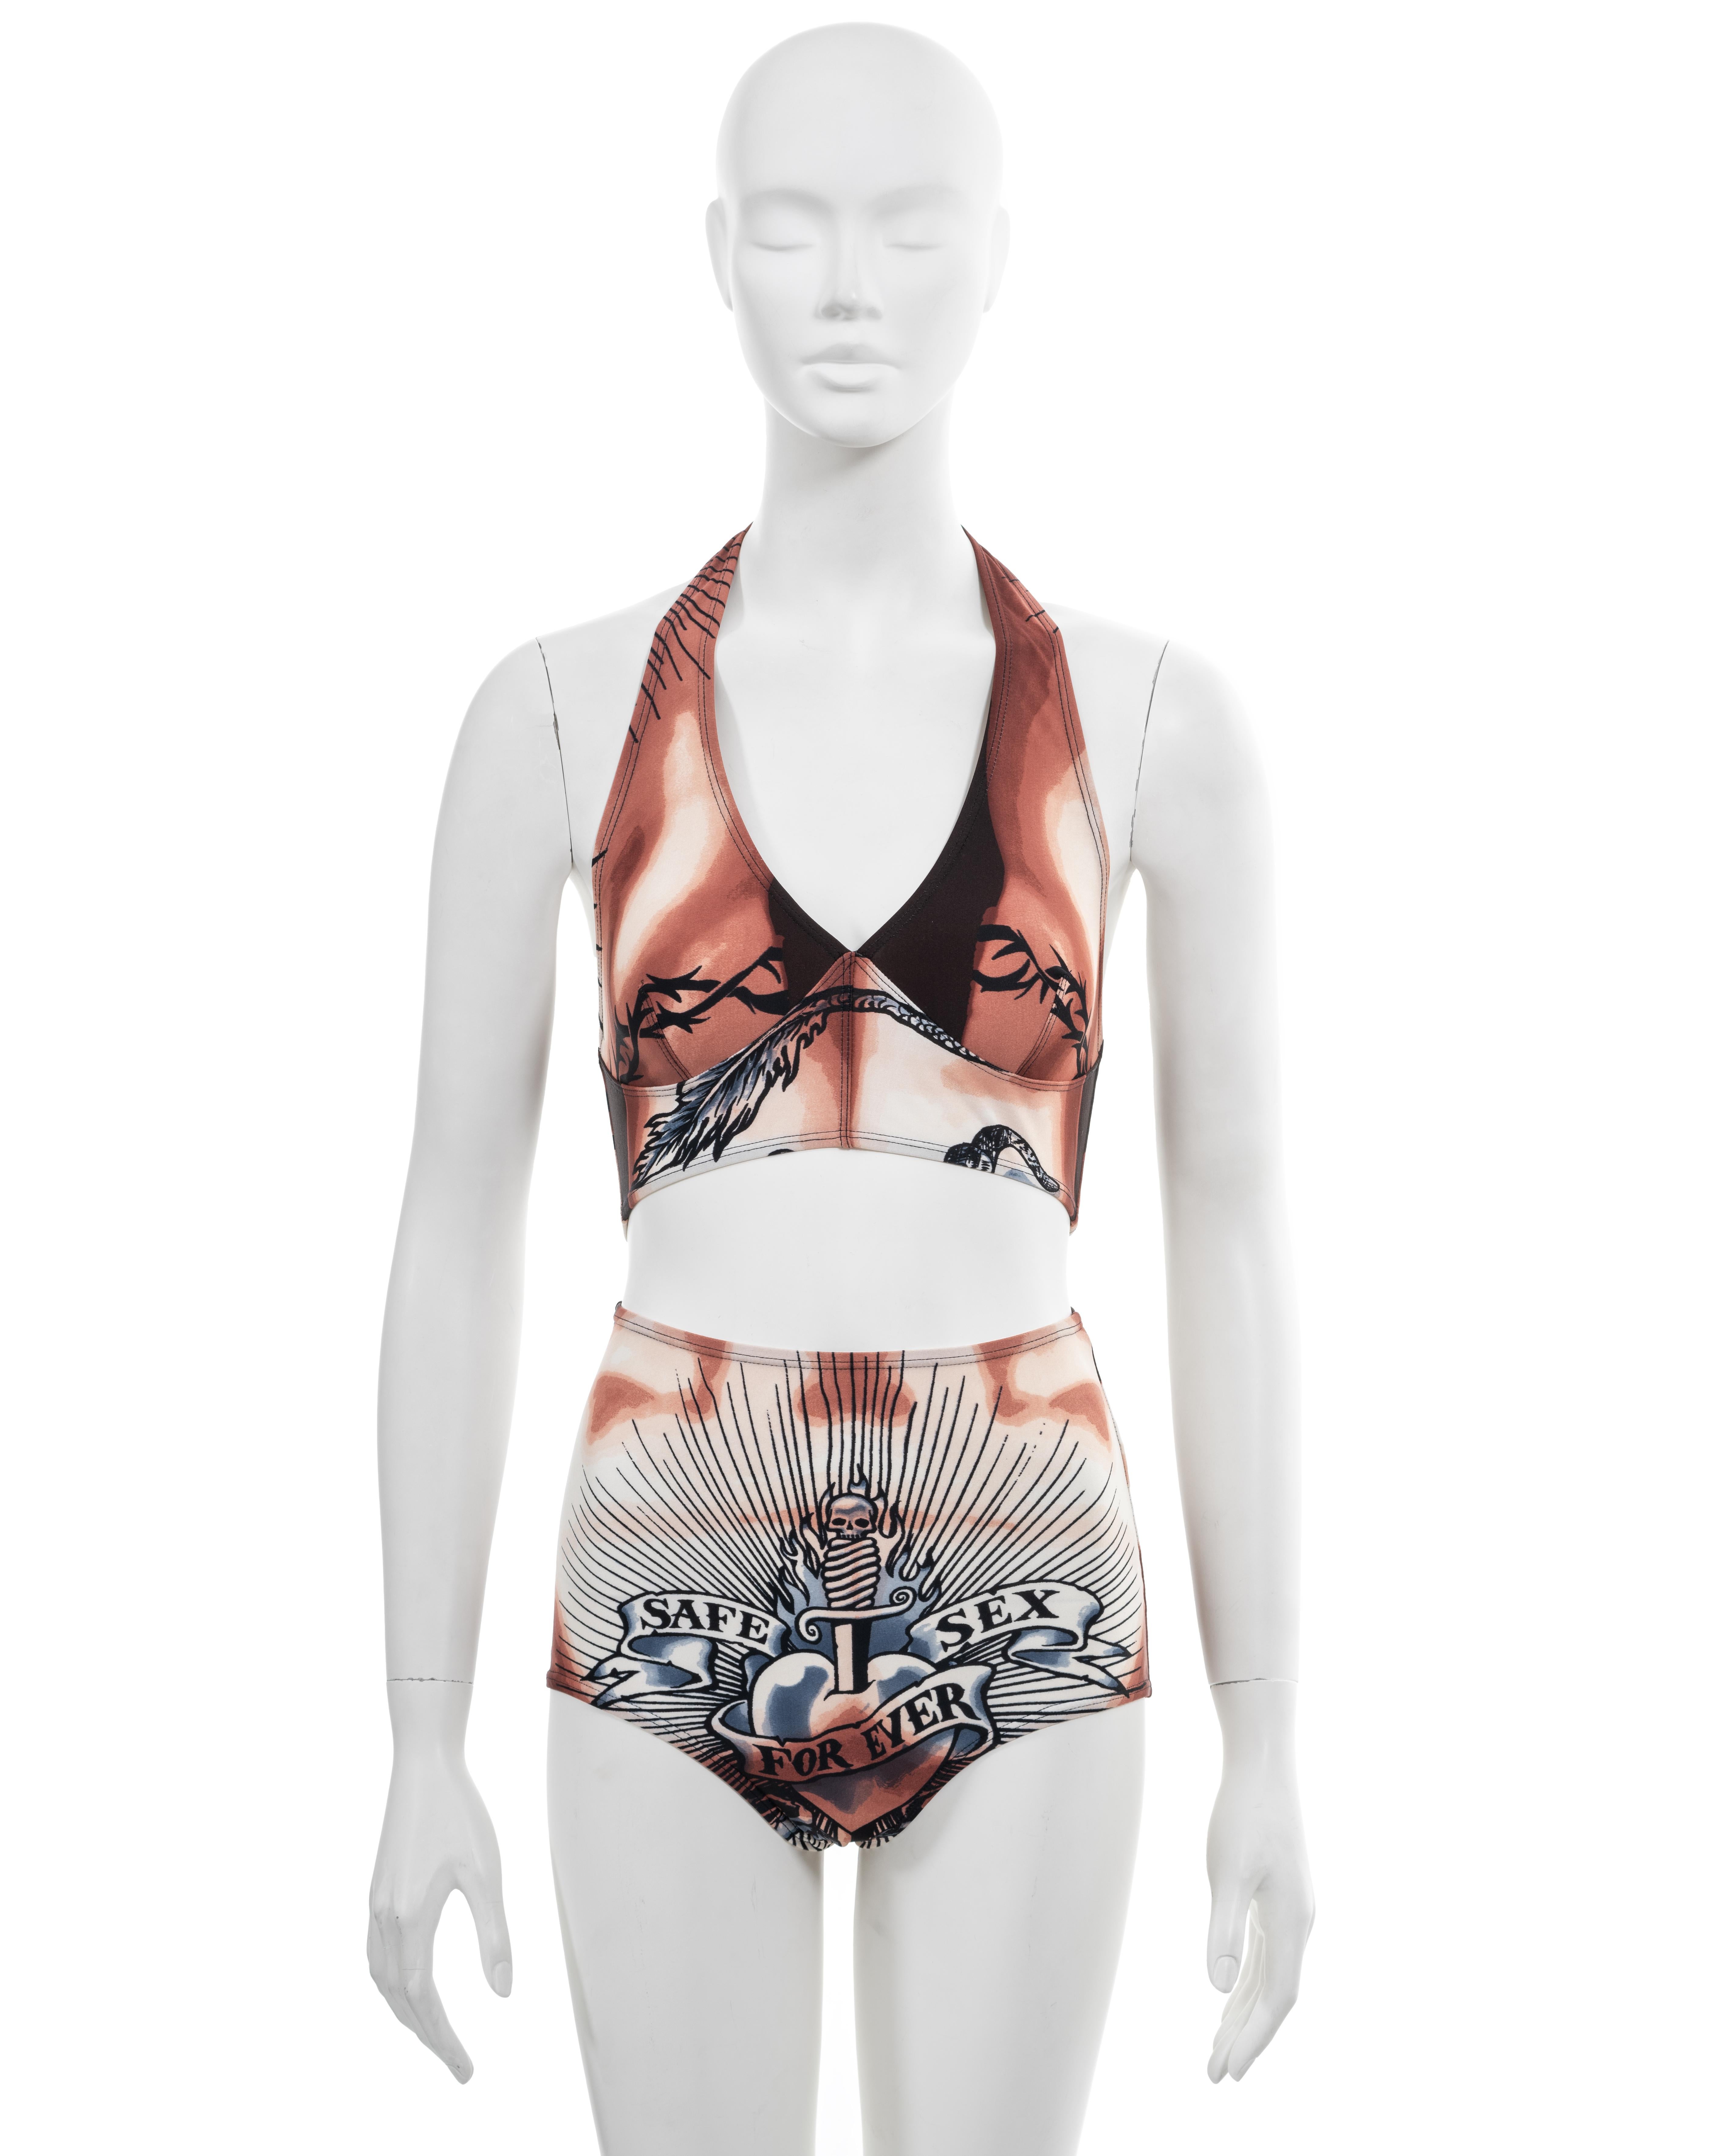 ▪ Archival Jean Paul Gaultier 2-piece set 
▪ Spring-Summer 1996
▪ Sold by One of a Kind Archive
▪ Iconic 'Safe Sex Forever' tattoo-print 
▪ Halter-neck crop top 
▪ High-rise panties 
▪ 78% Nylon, 22% Spandex 
▪ Size Medium
▪ Made in Italy

The